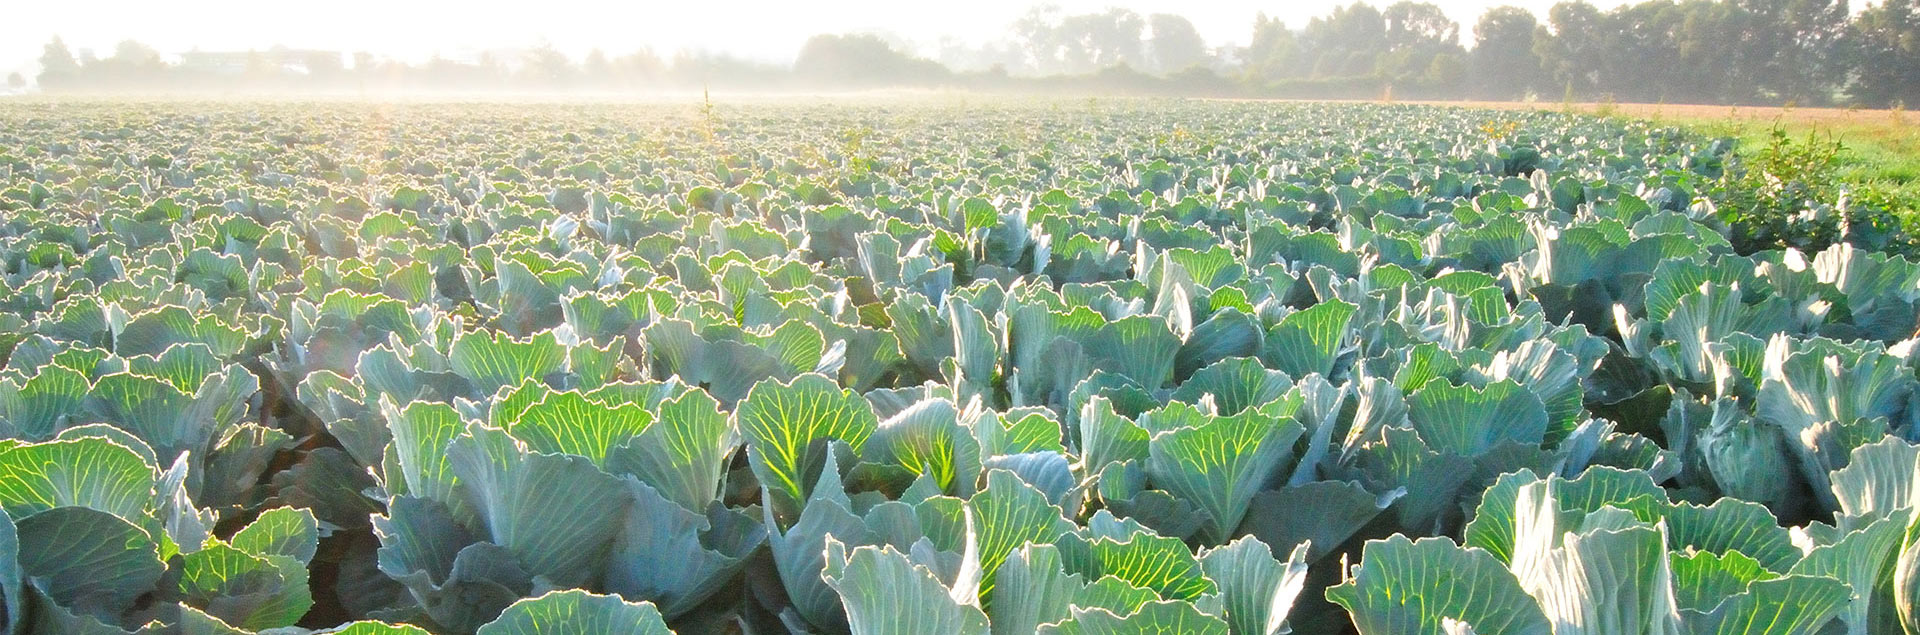 A field of cabbage.